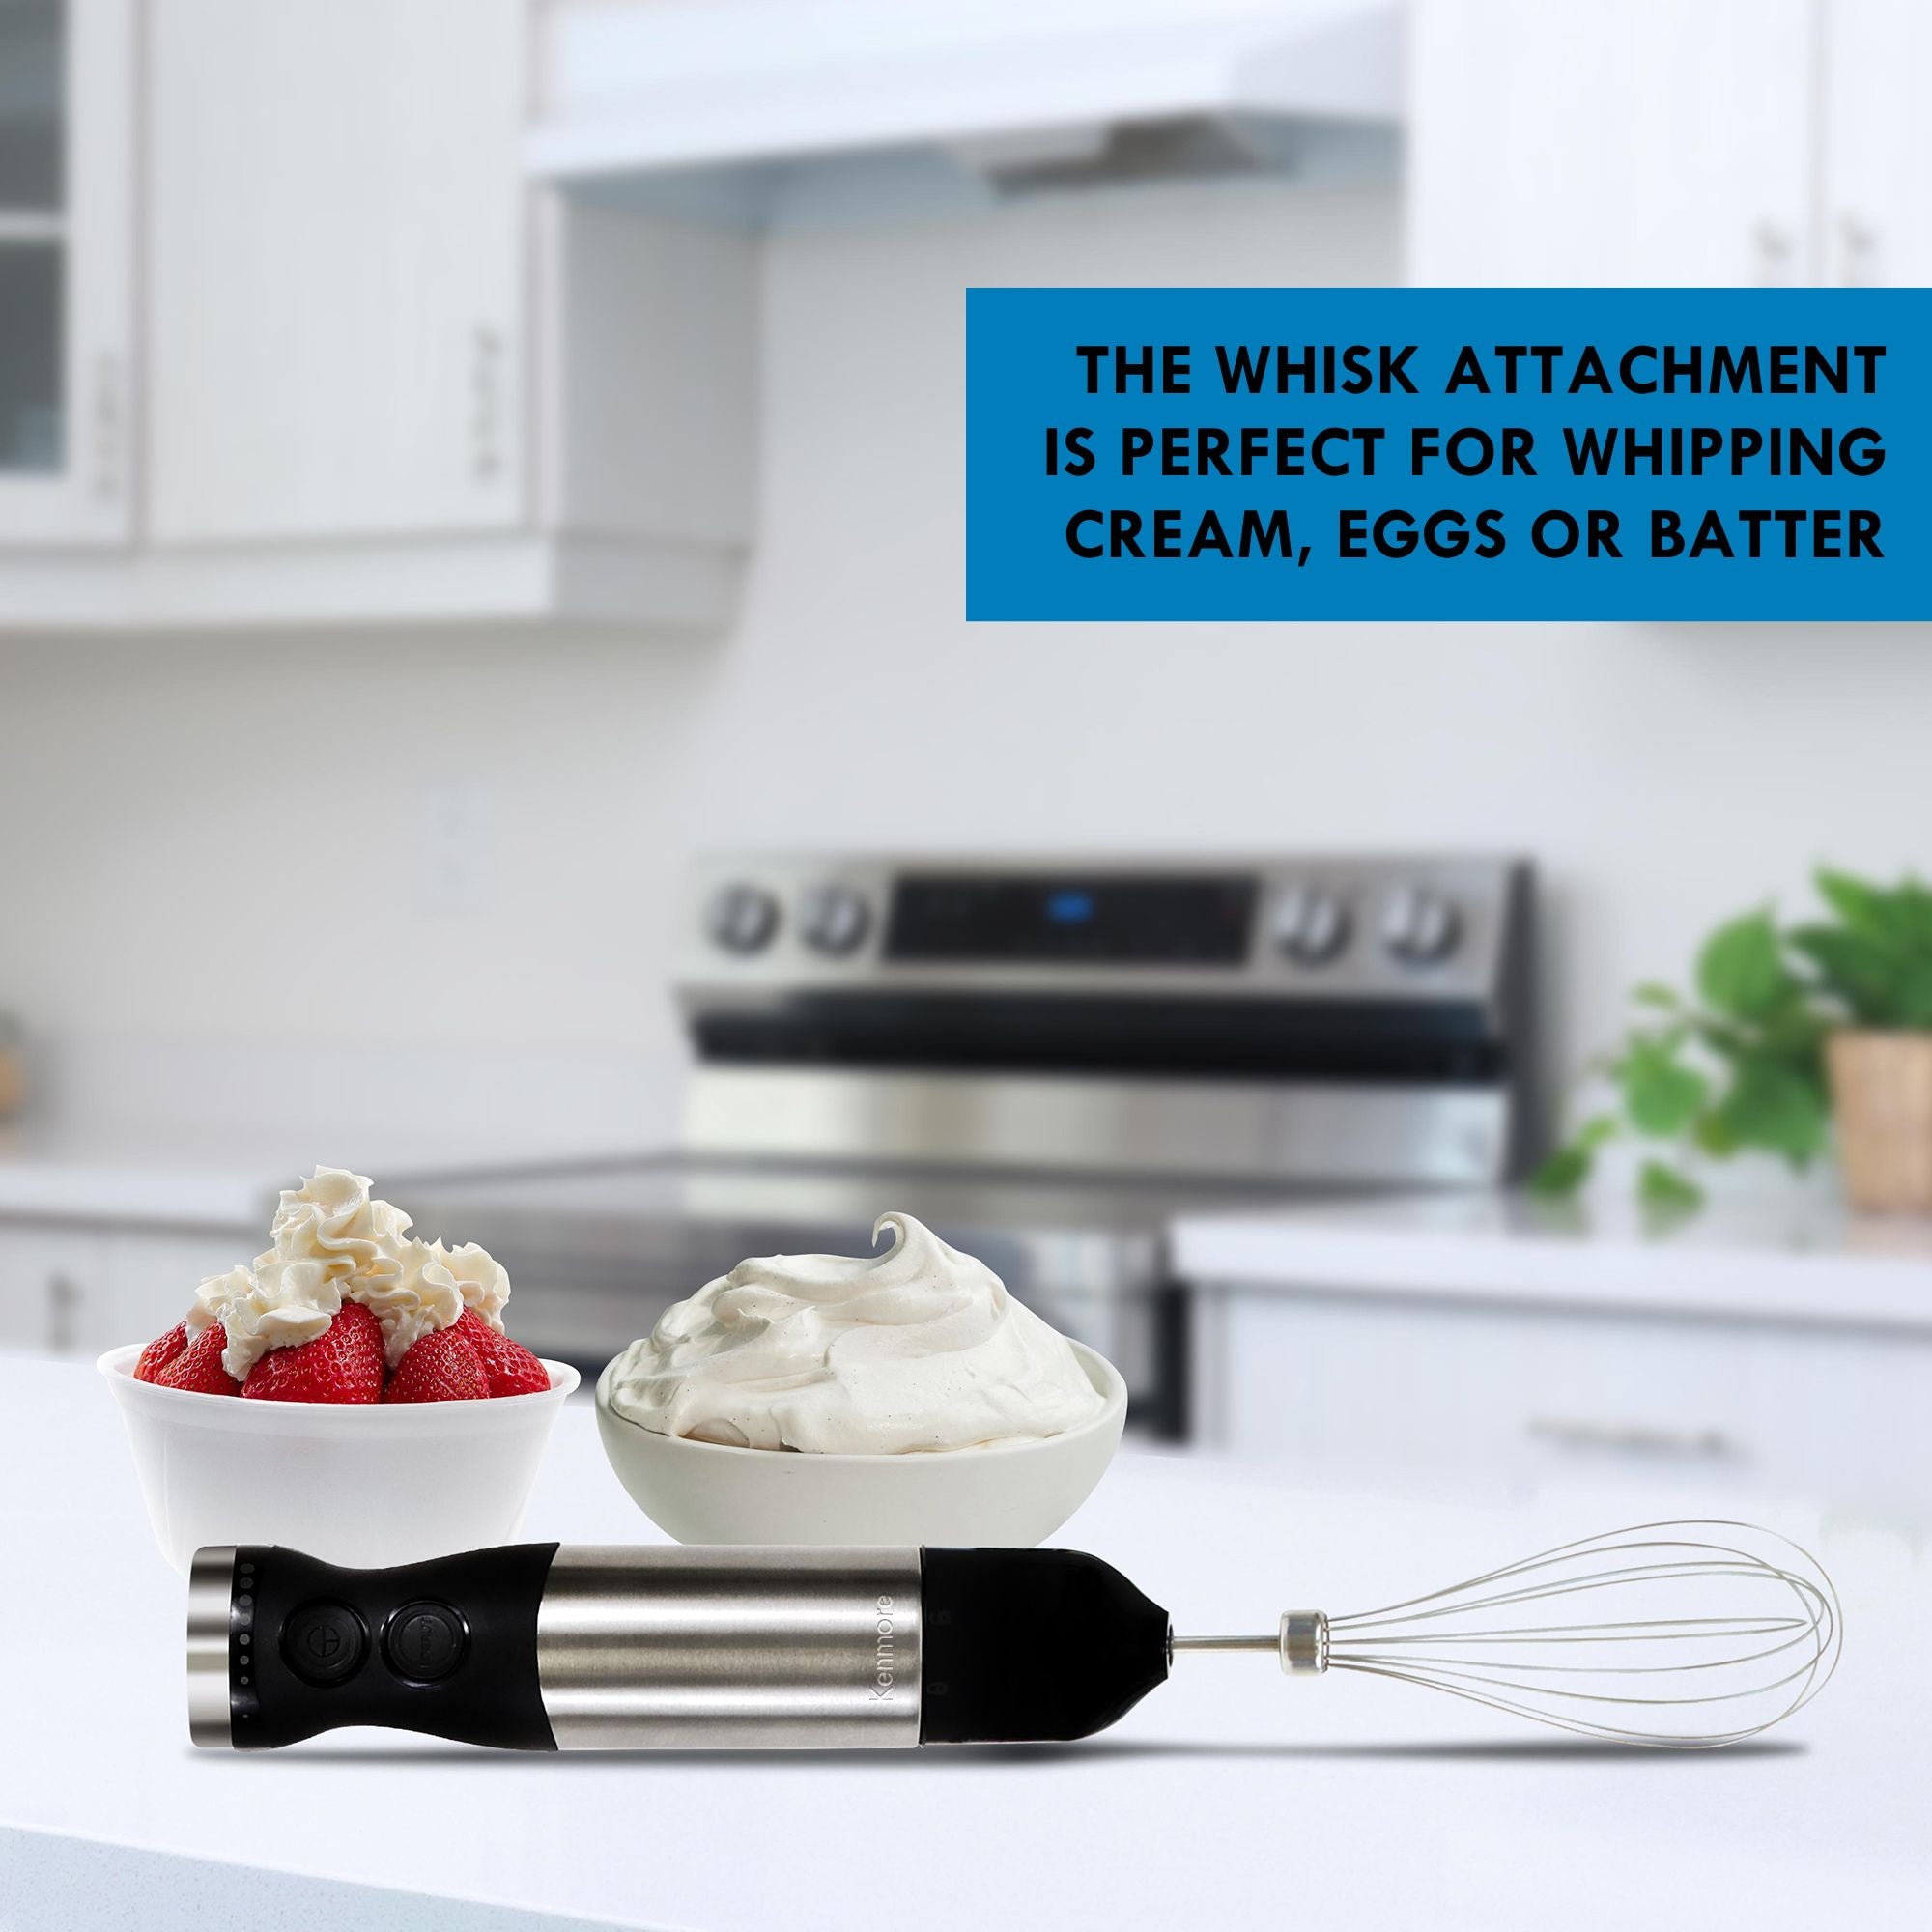 Black and silver hand blender with whisk attachment lying on a white kitchen counter in front of two bowls filled with strawberries and whipped cream. Text overlay reads, "The whisk attachment is perfect for whipping cream, eggs or batter"